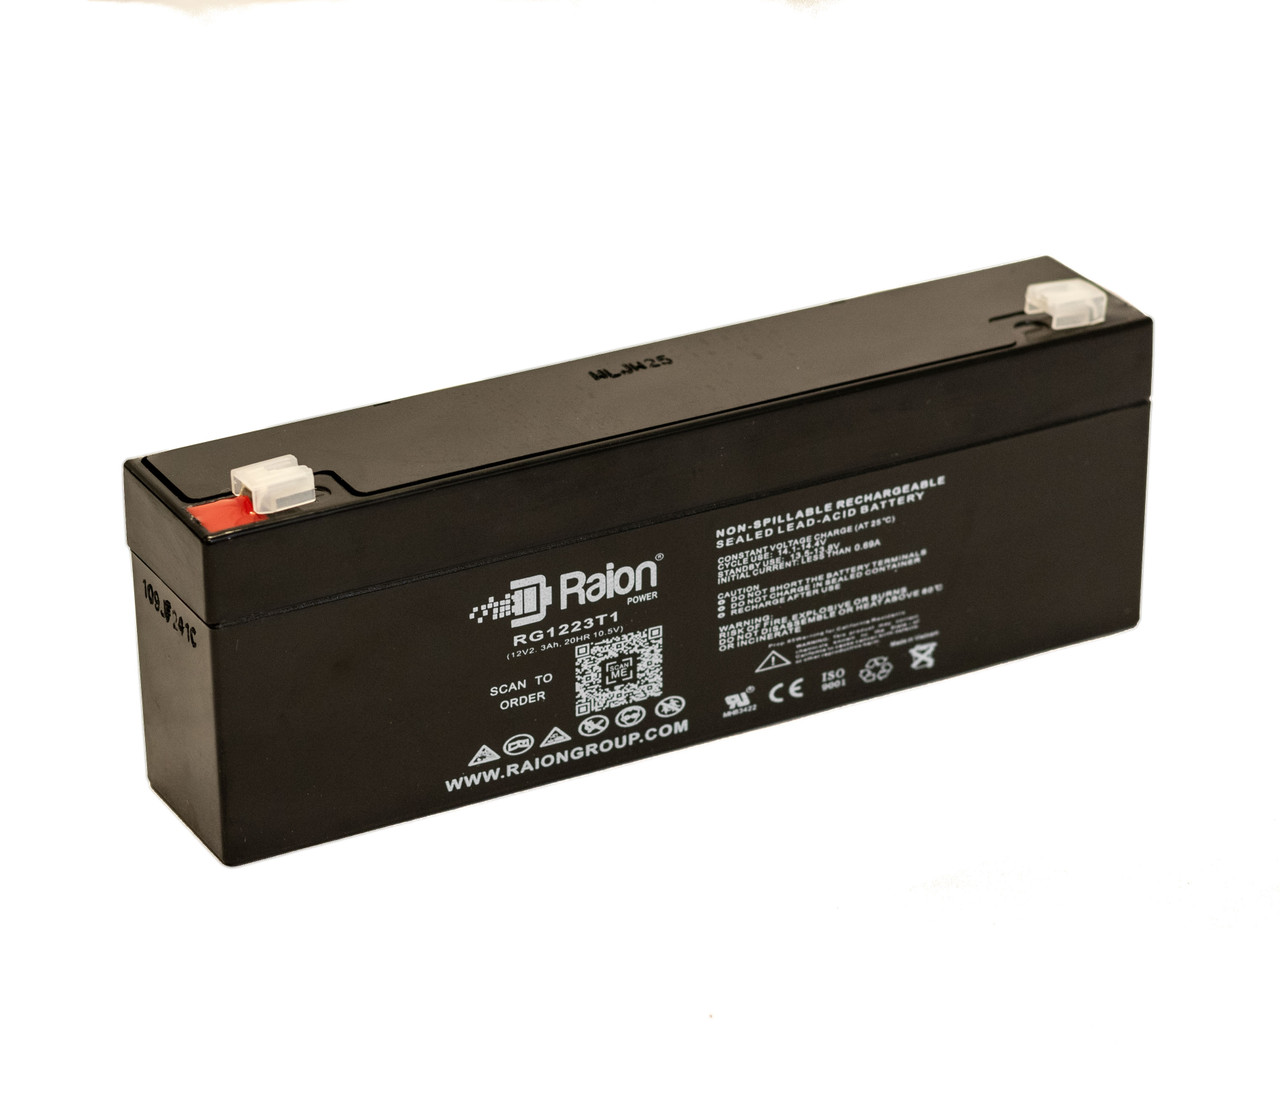 Raion Power RG1223T1 Replacement Battery for Dr Power Equipment Lawn VAC